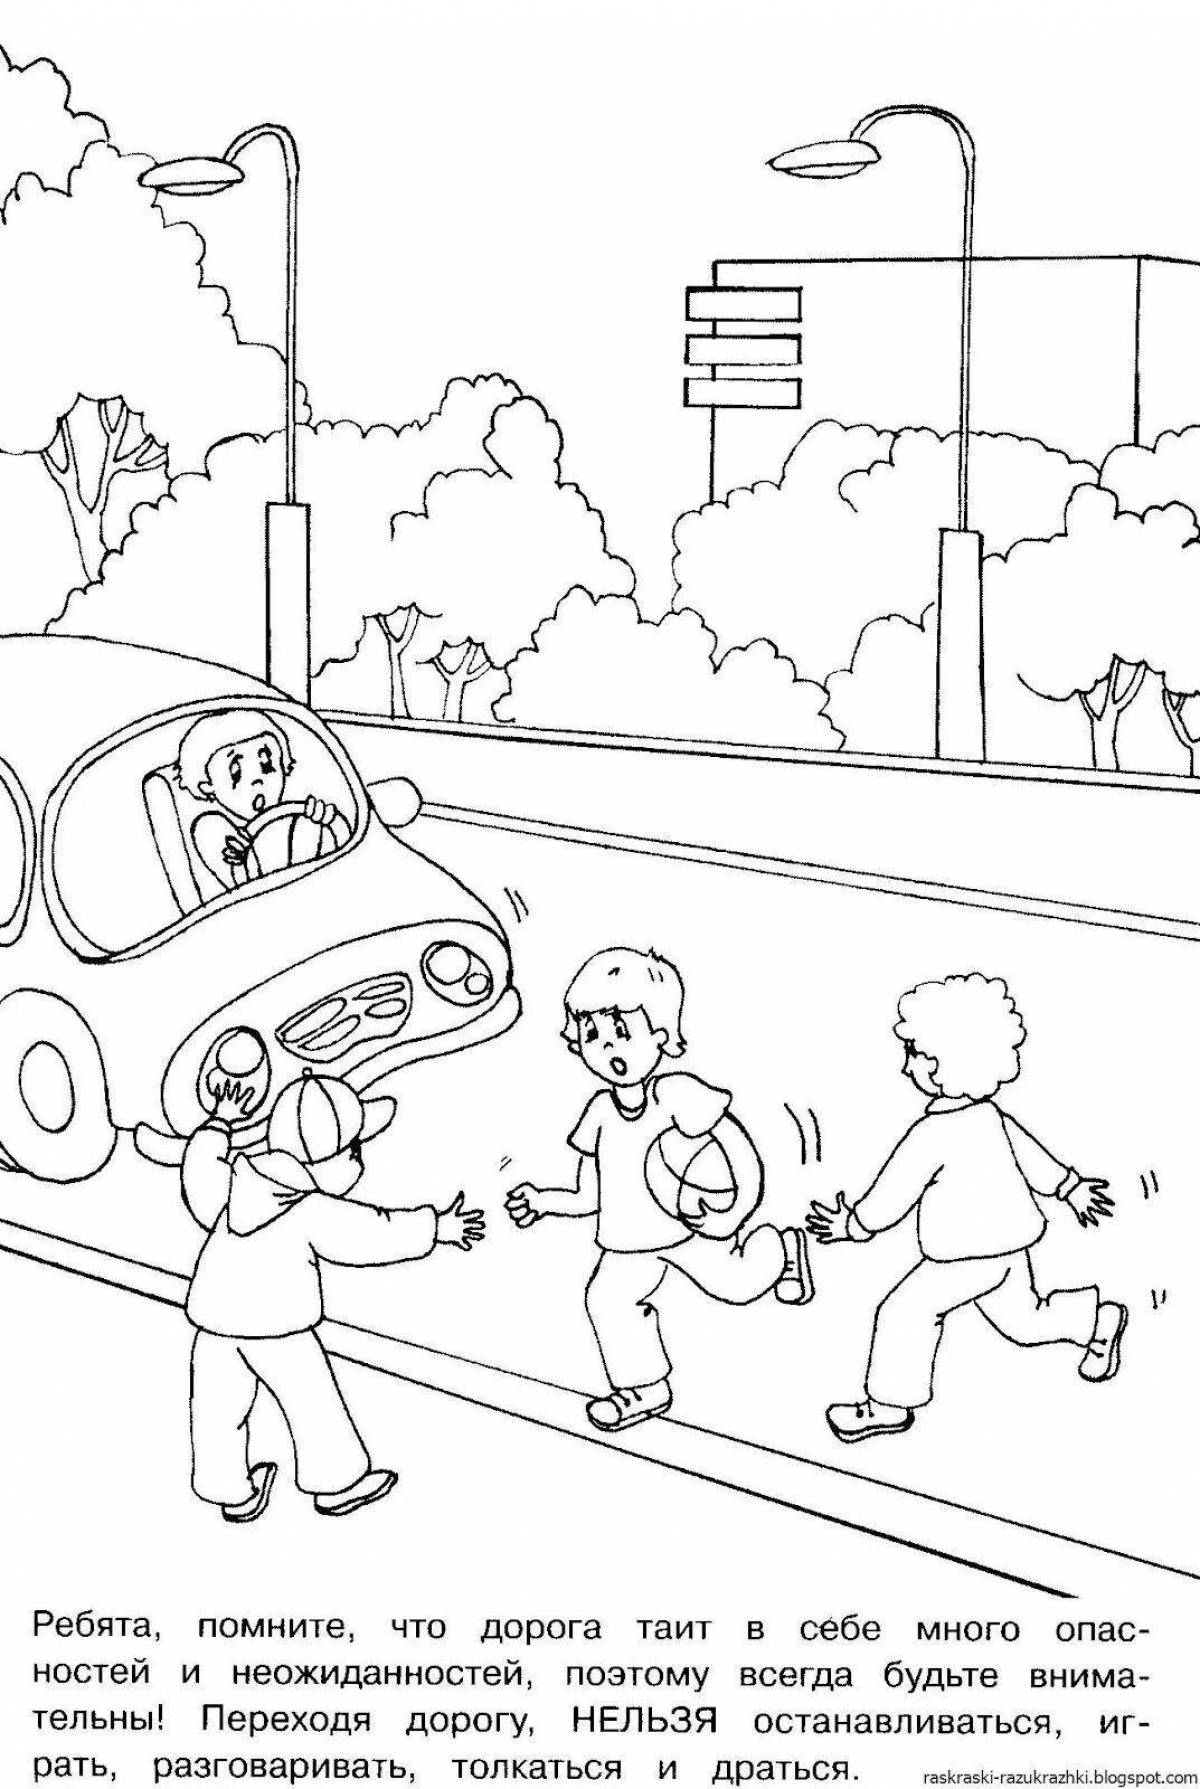 Adorable coloring book for kids pdd